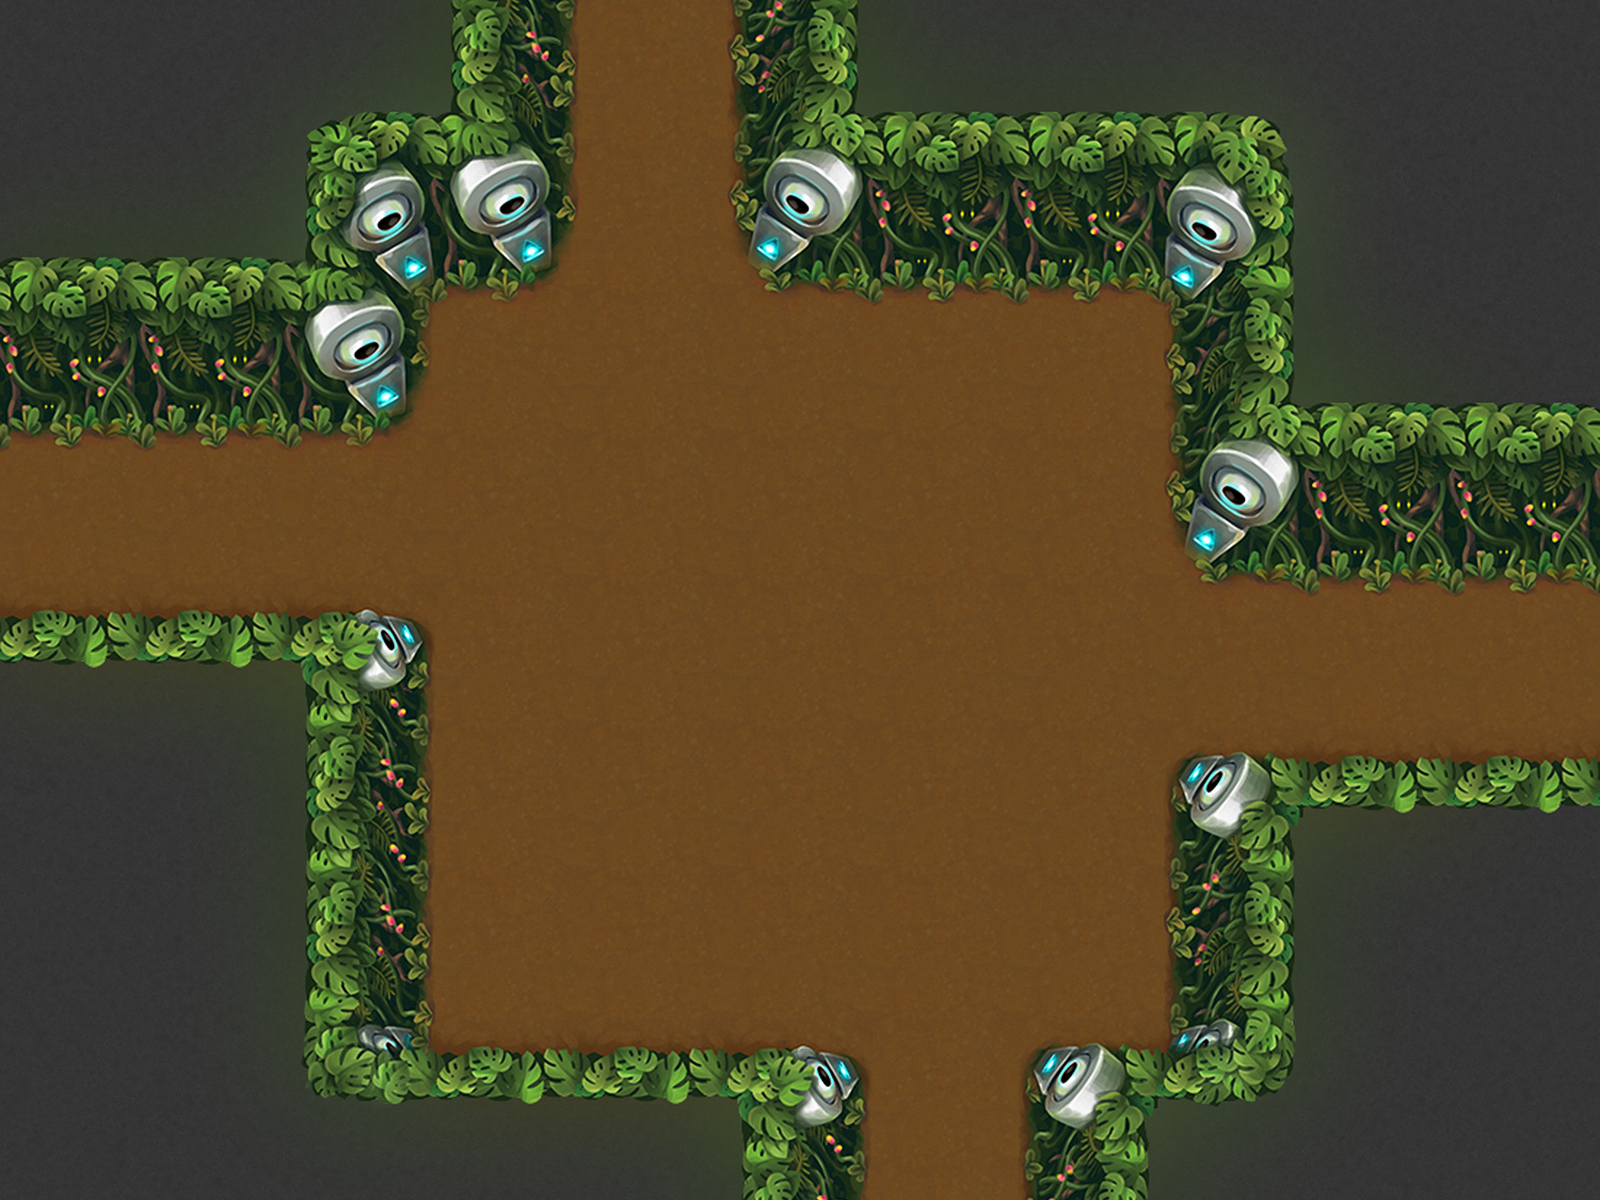 Jungle theme dungeon tileset for a topdown RPG game. by Margarita